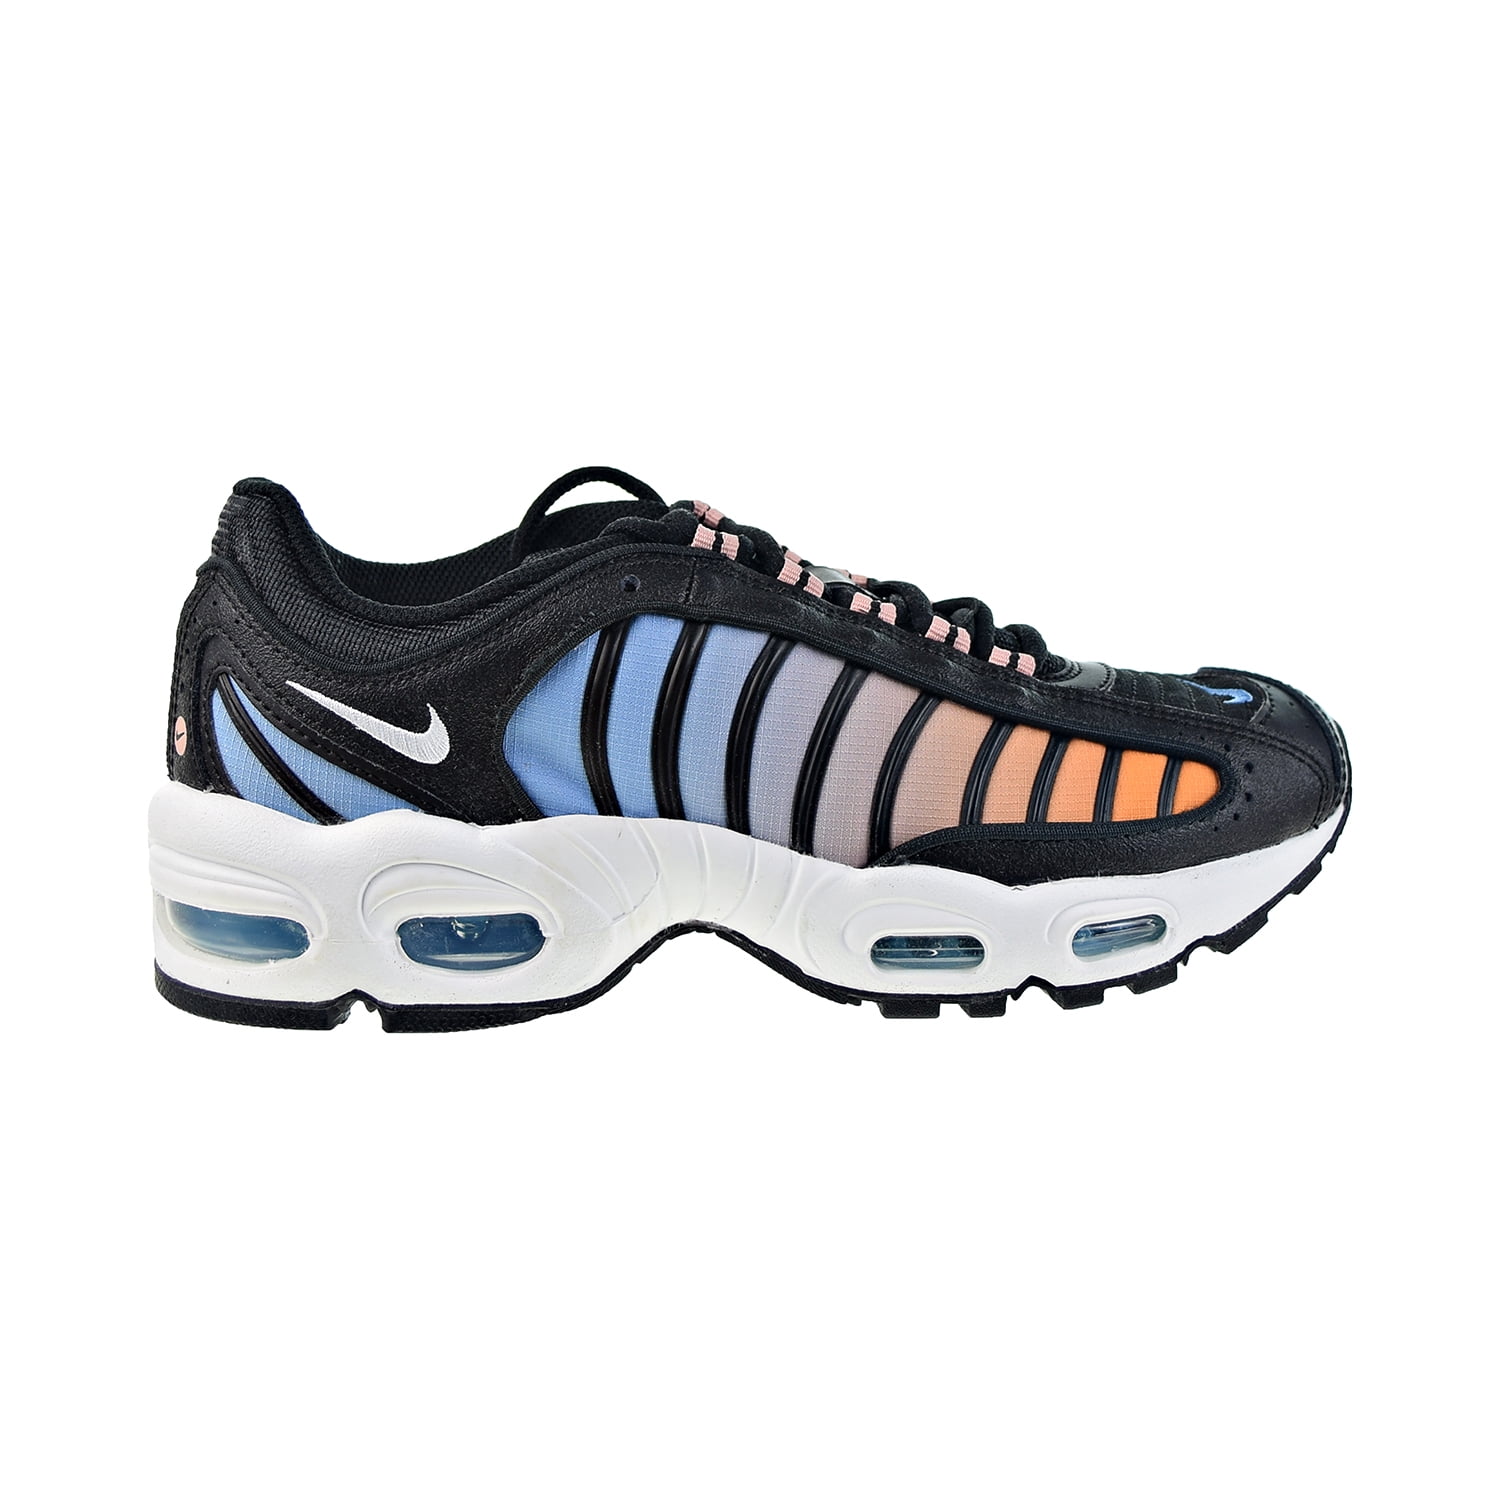 Nike Air Max Tailwind IV Women's Shoes Black-White-Coral Stardust ...